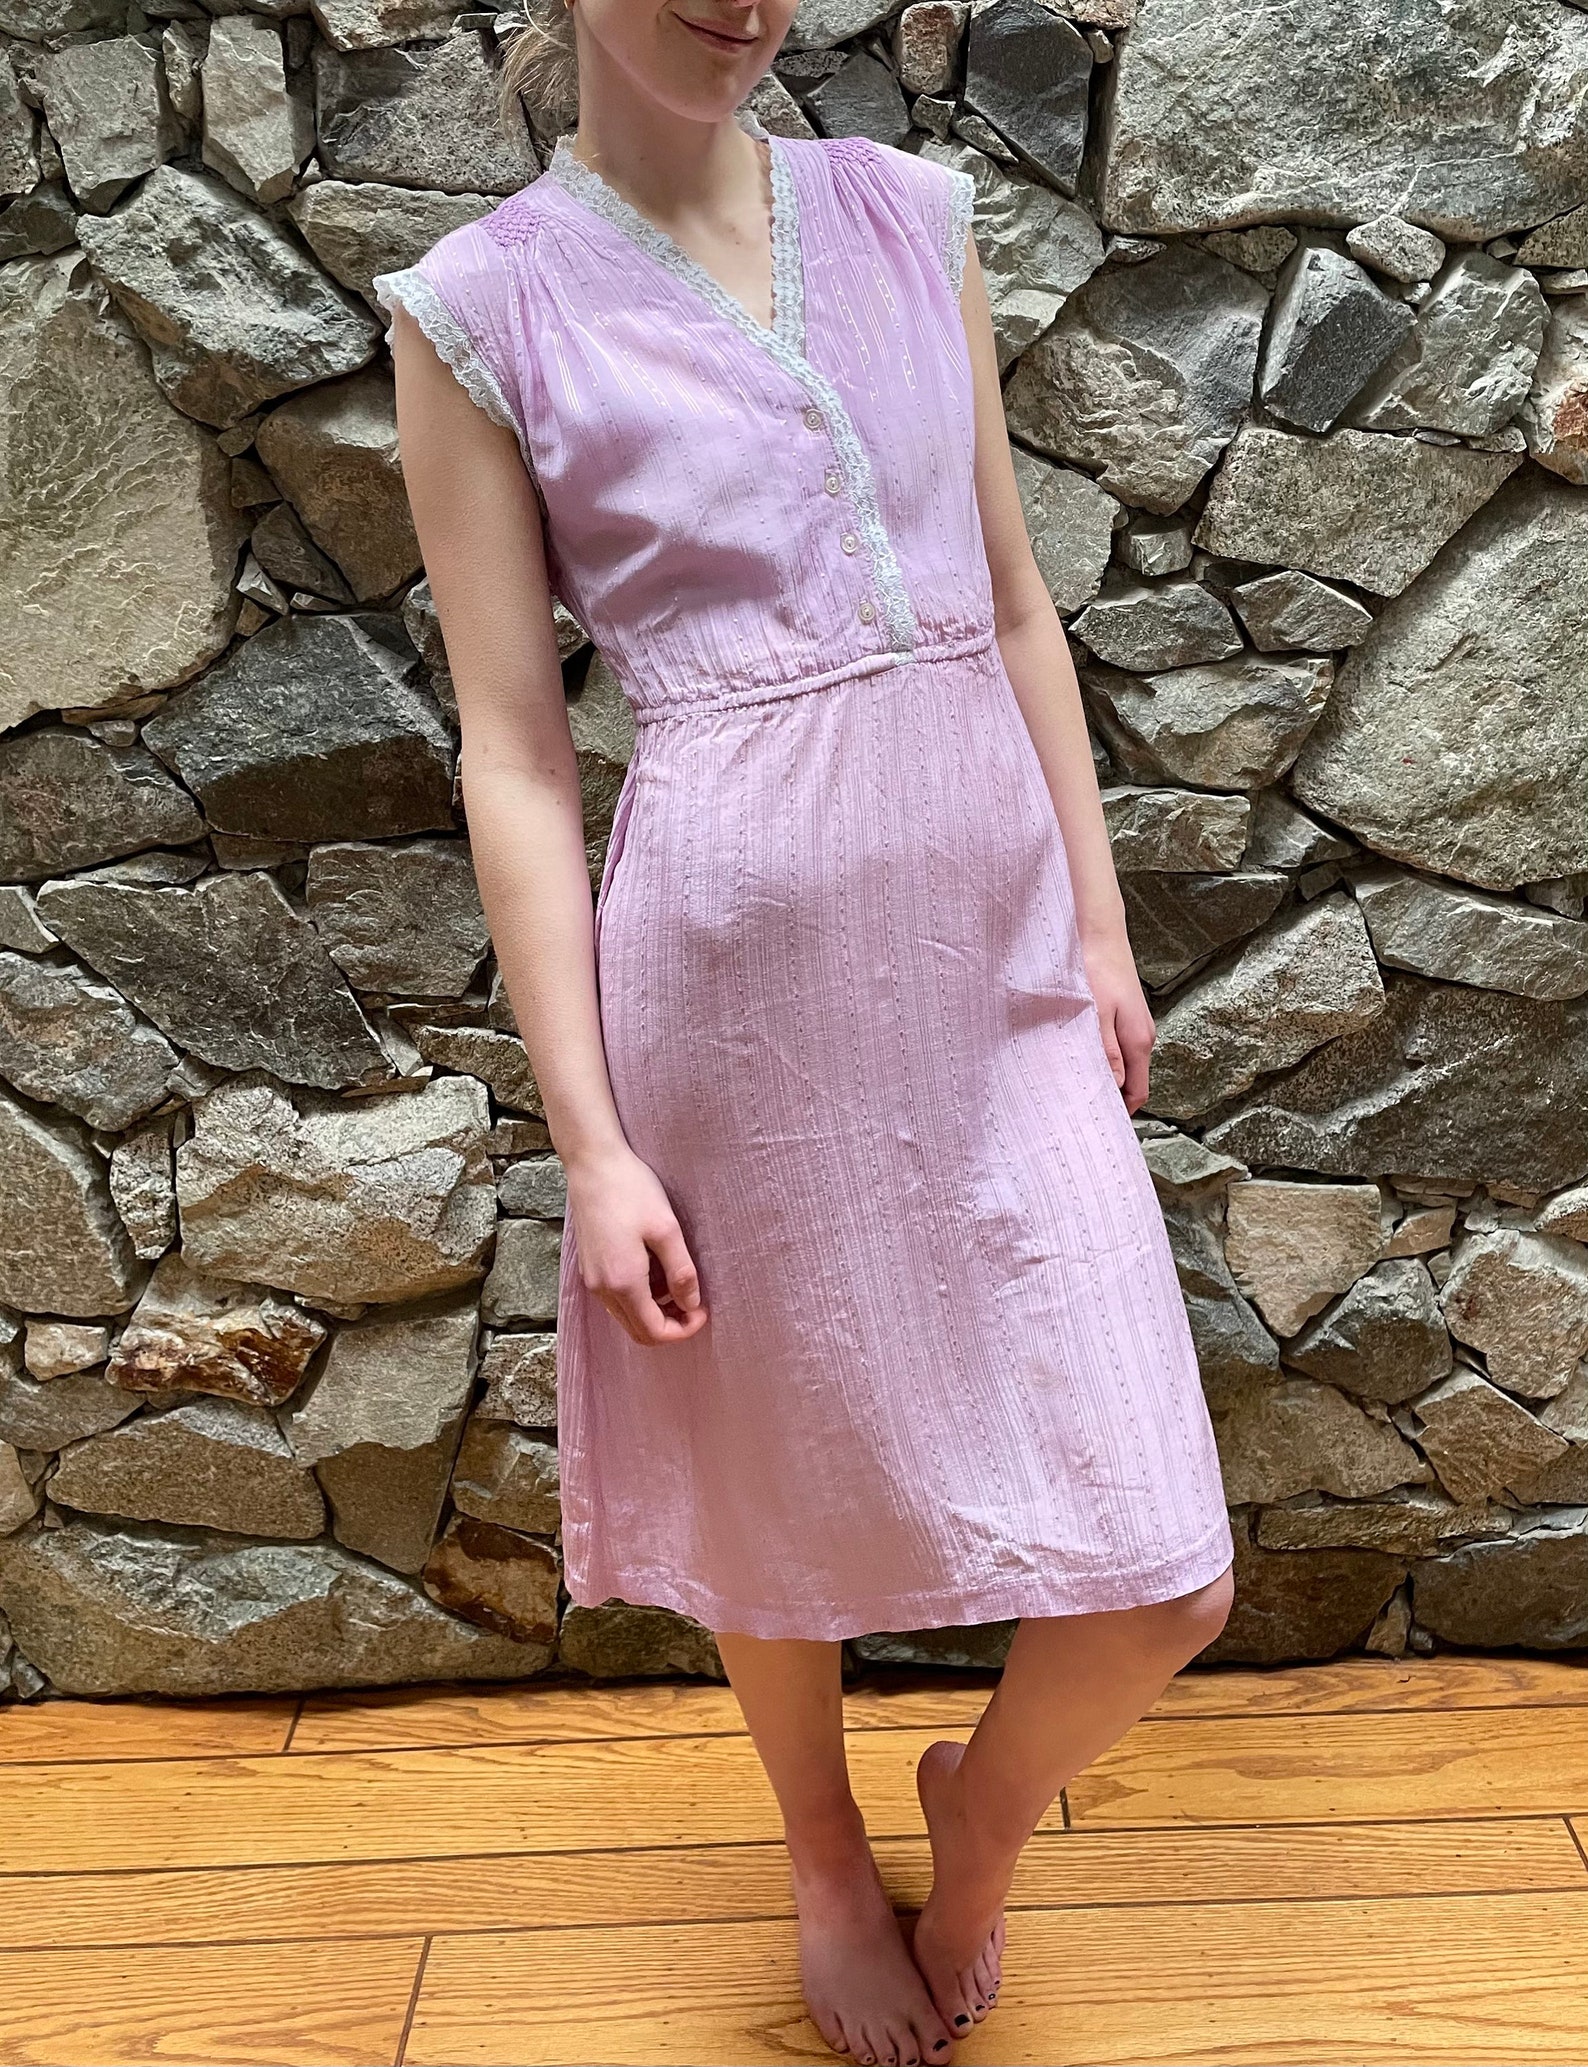 Lovely 1970s Vintage Pale Lavender Dress Made In Canada | Etsy